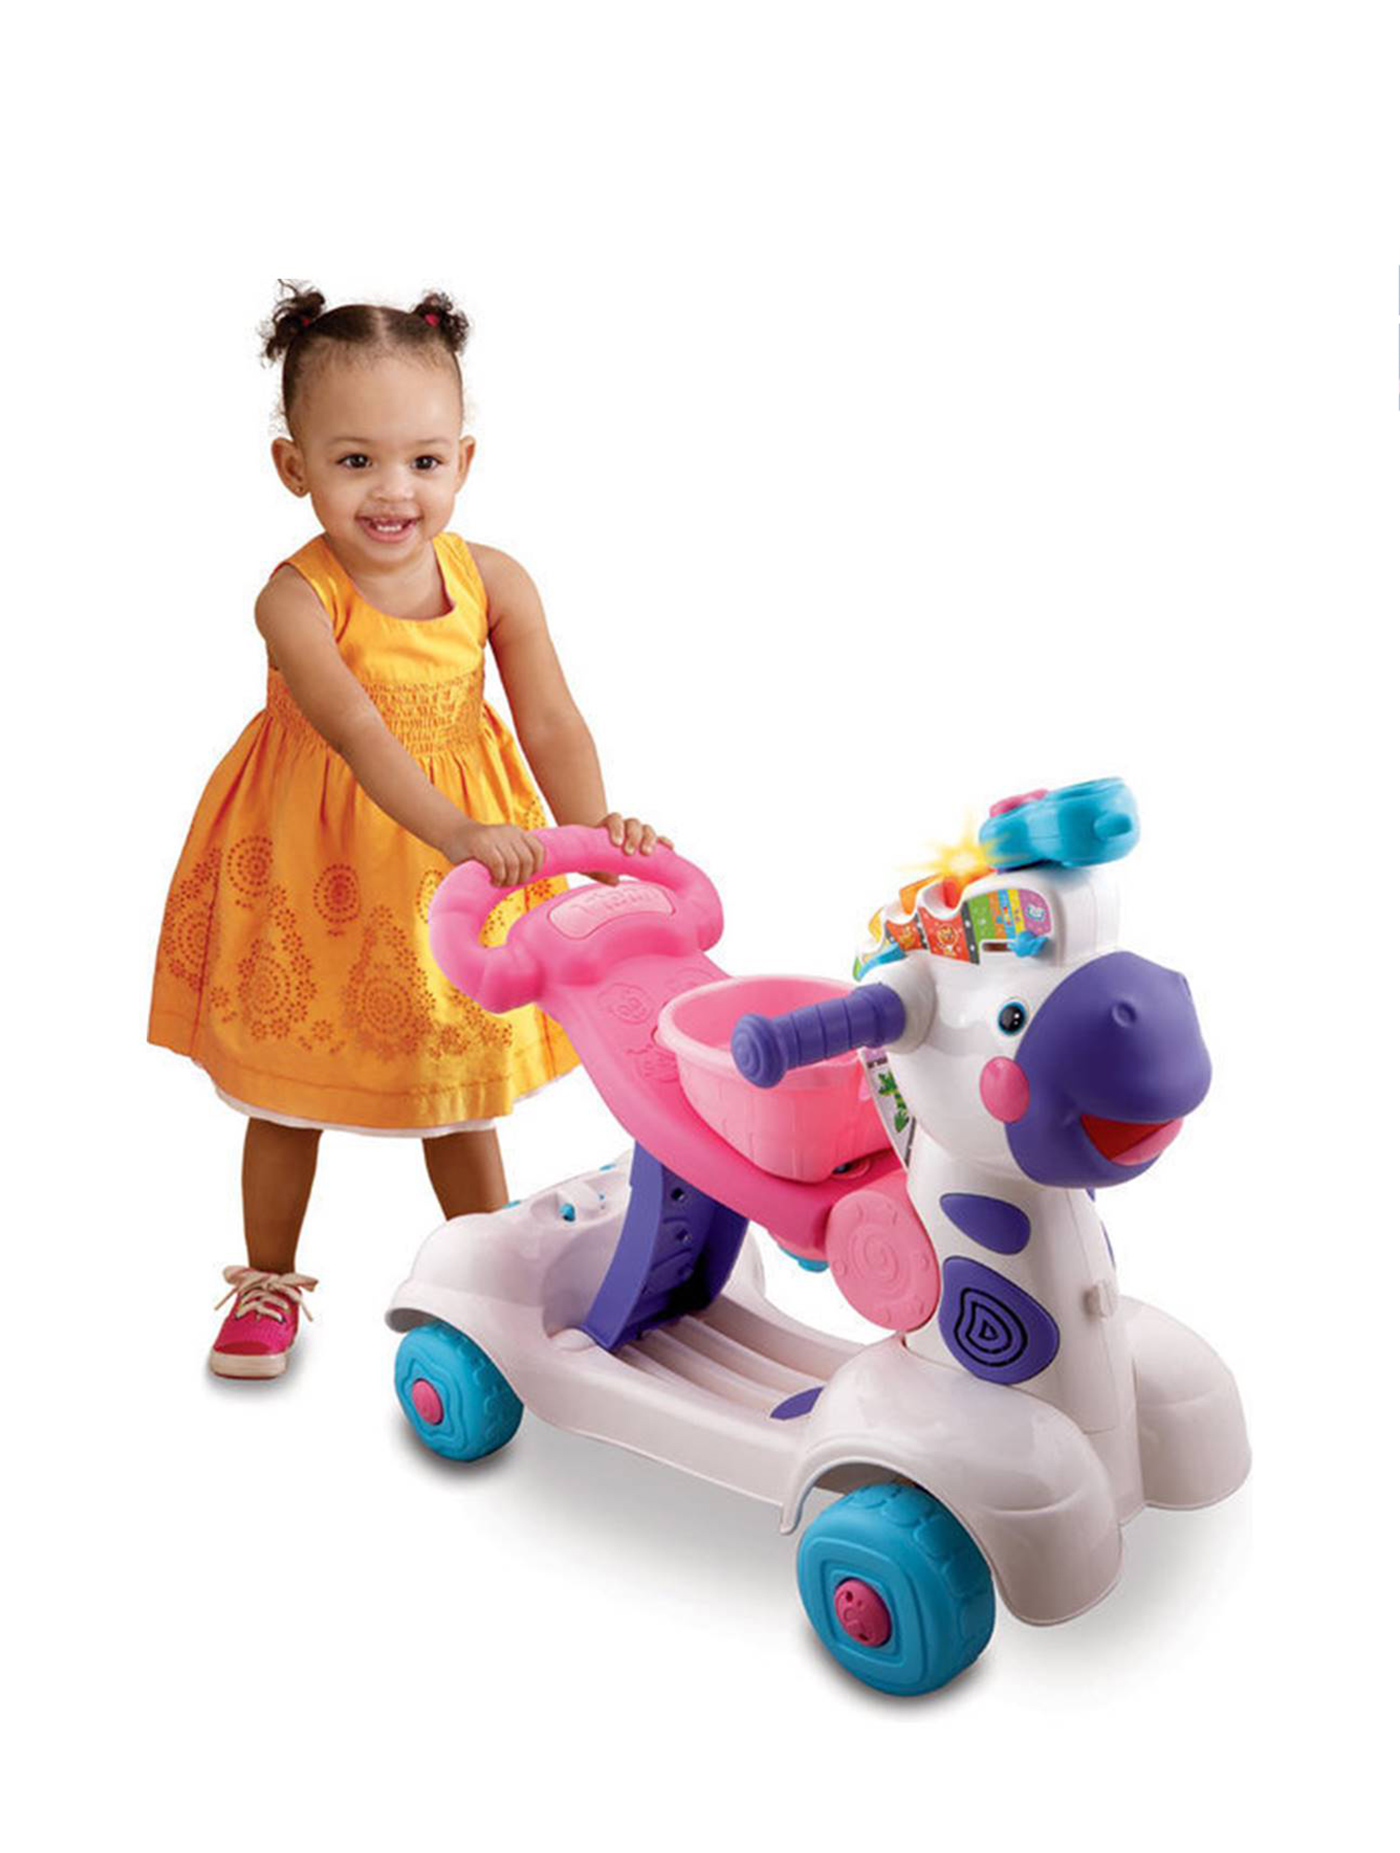 Vtech 3 in 1 Learning Zebra Scooter Ride On (White/Pink ...